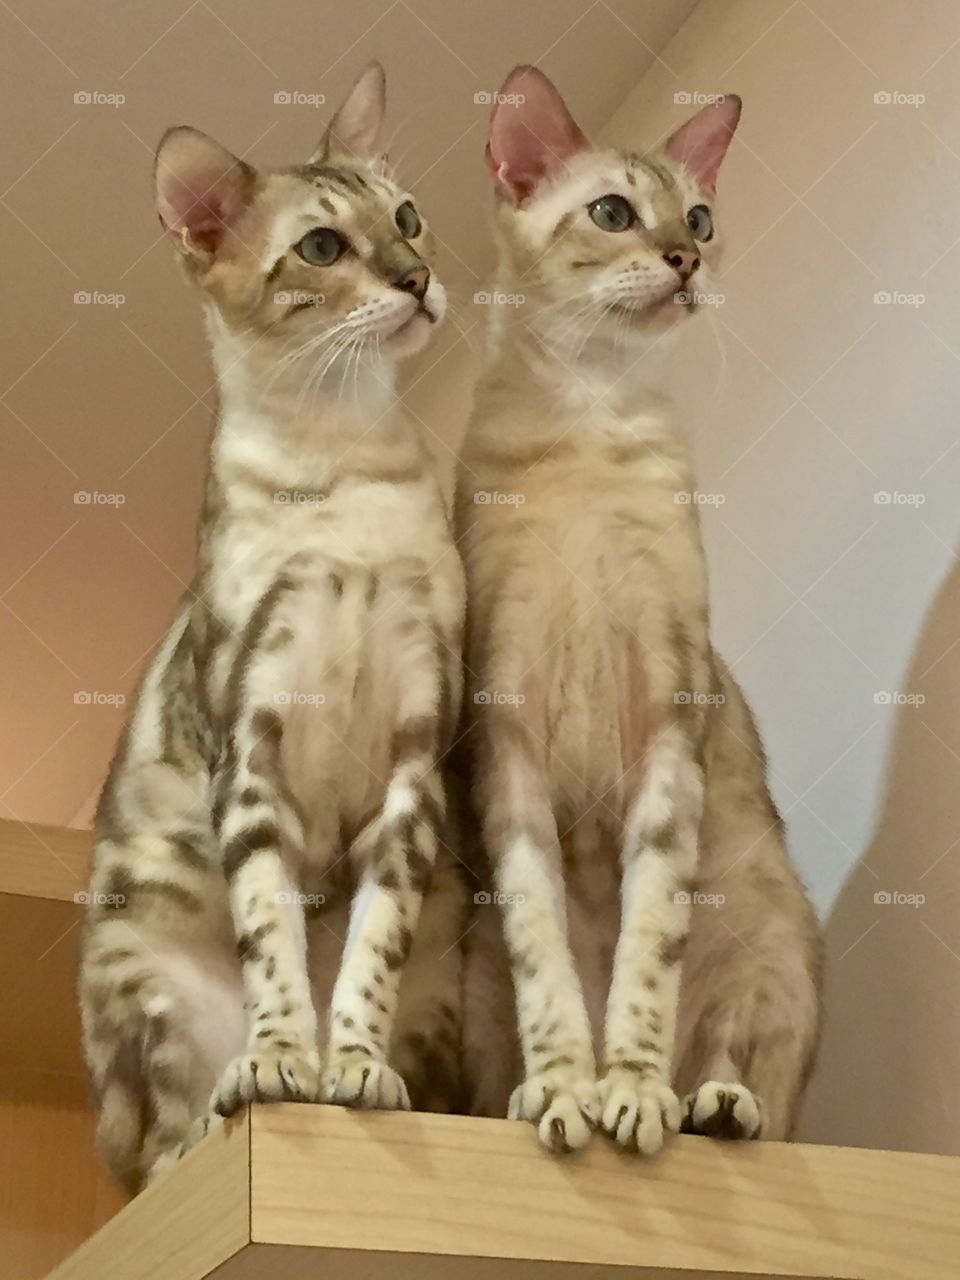 Seeing Double